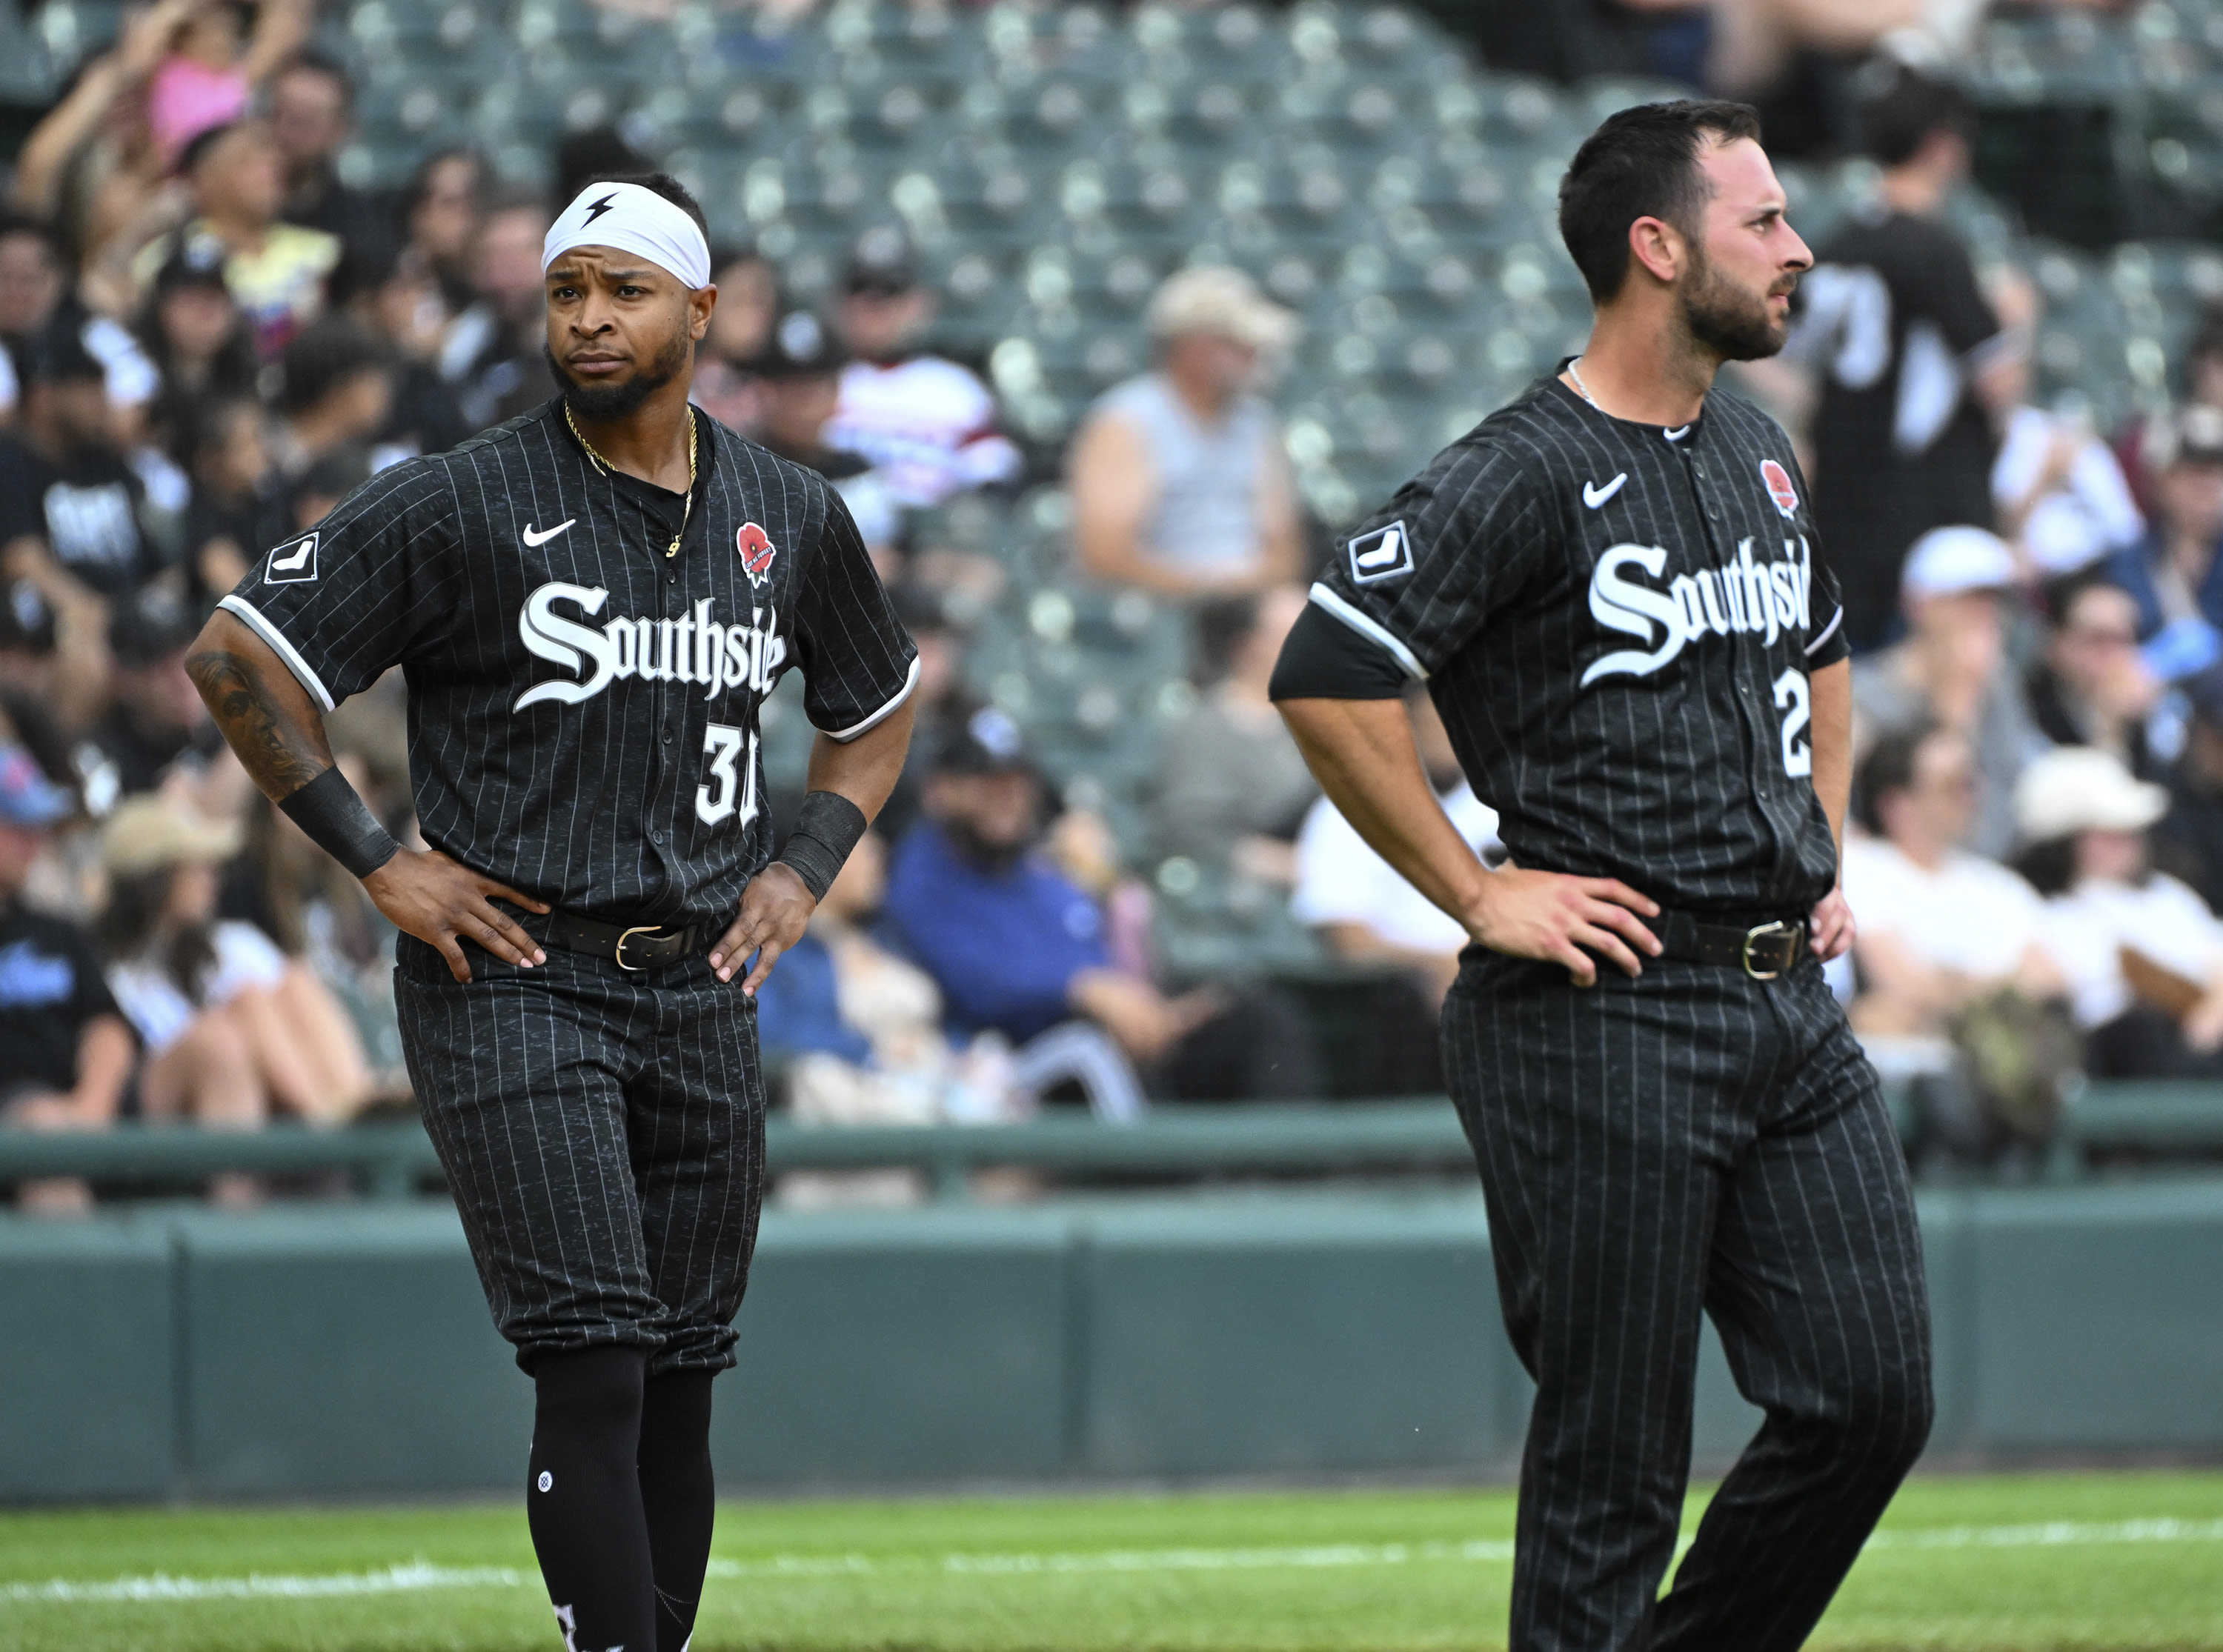 One day after ‘flat’ flap, Chicago White Sox fall to 15-40 with their 6th straight loss and 10th in 11 games